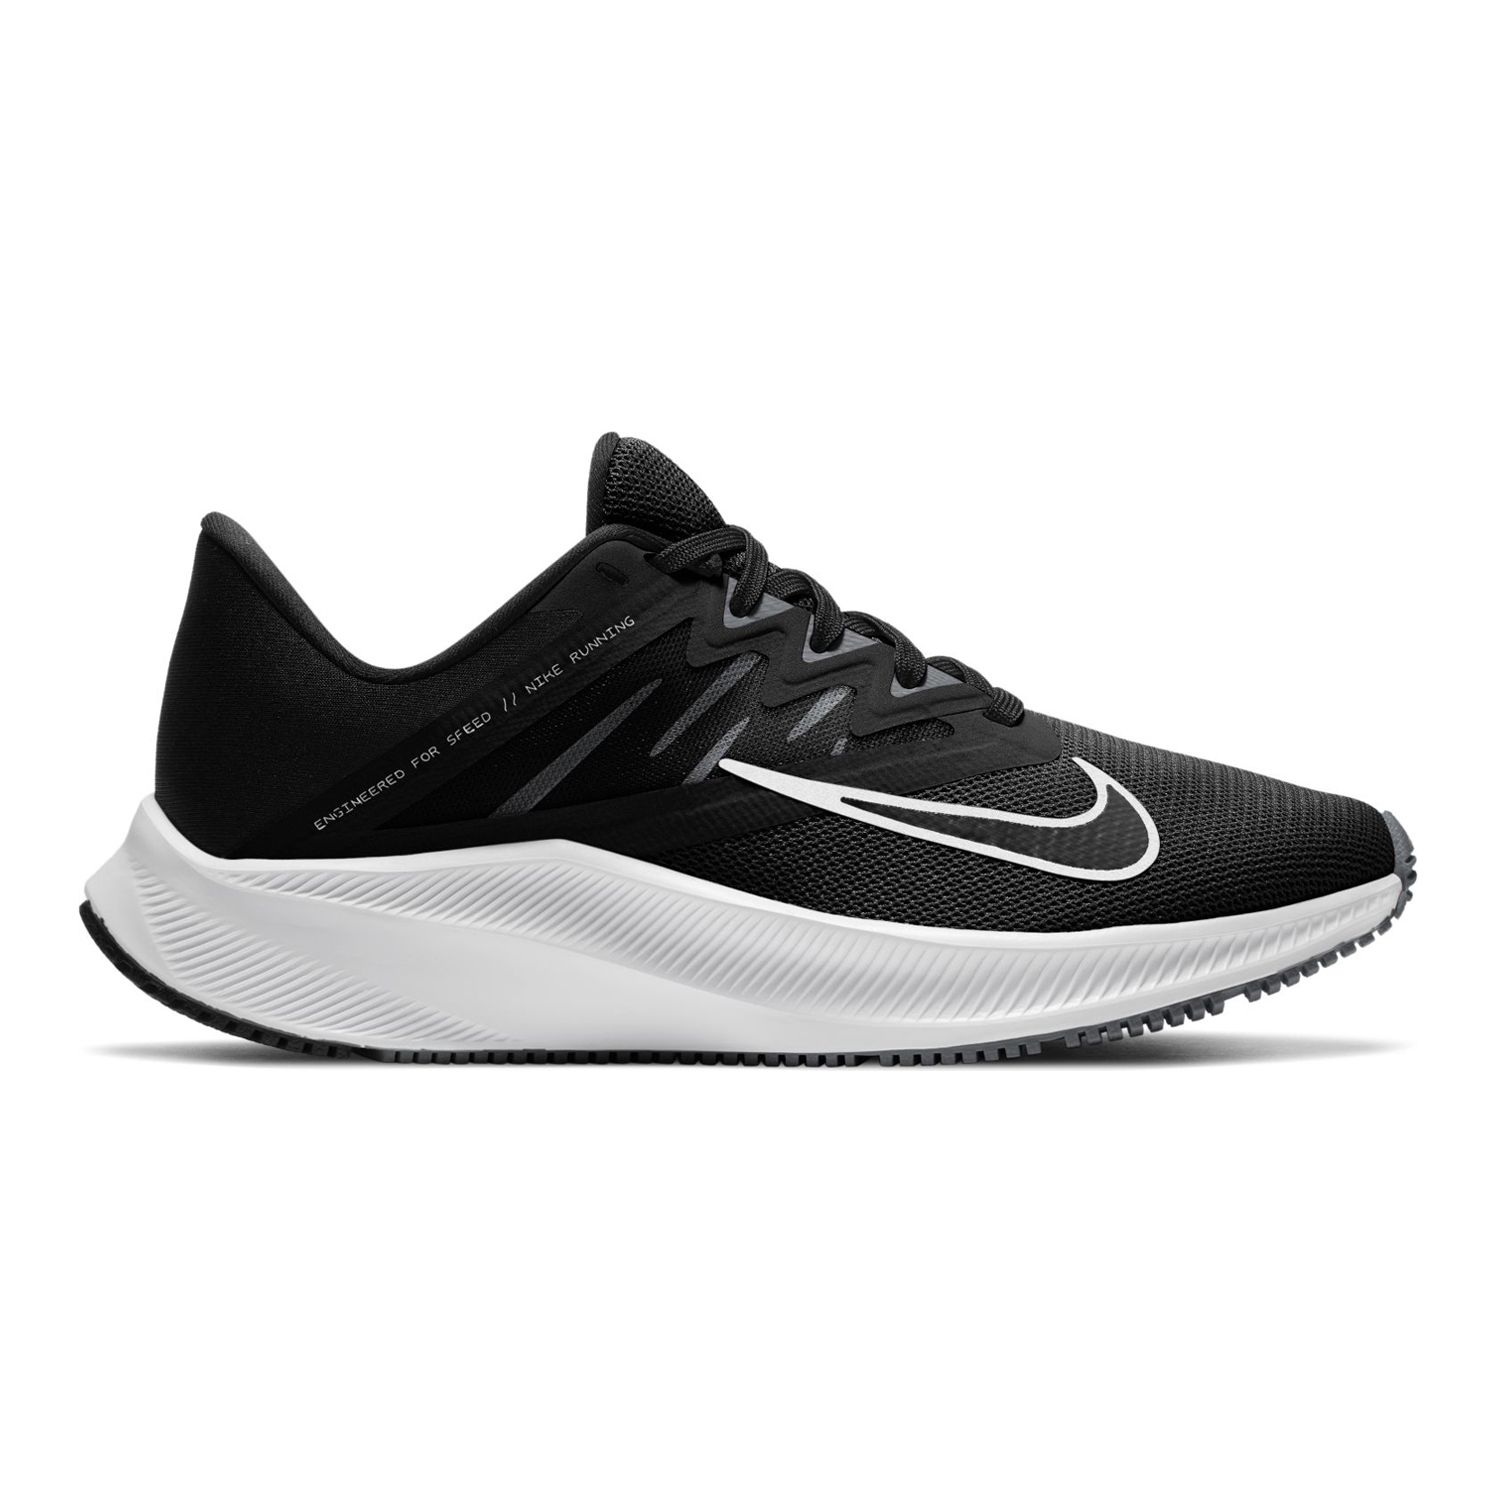 nike quest 3 running shoes